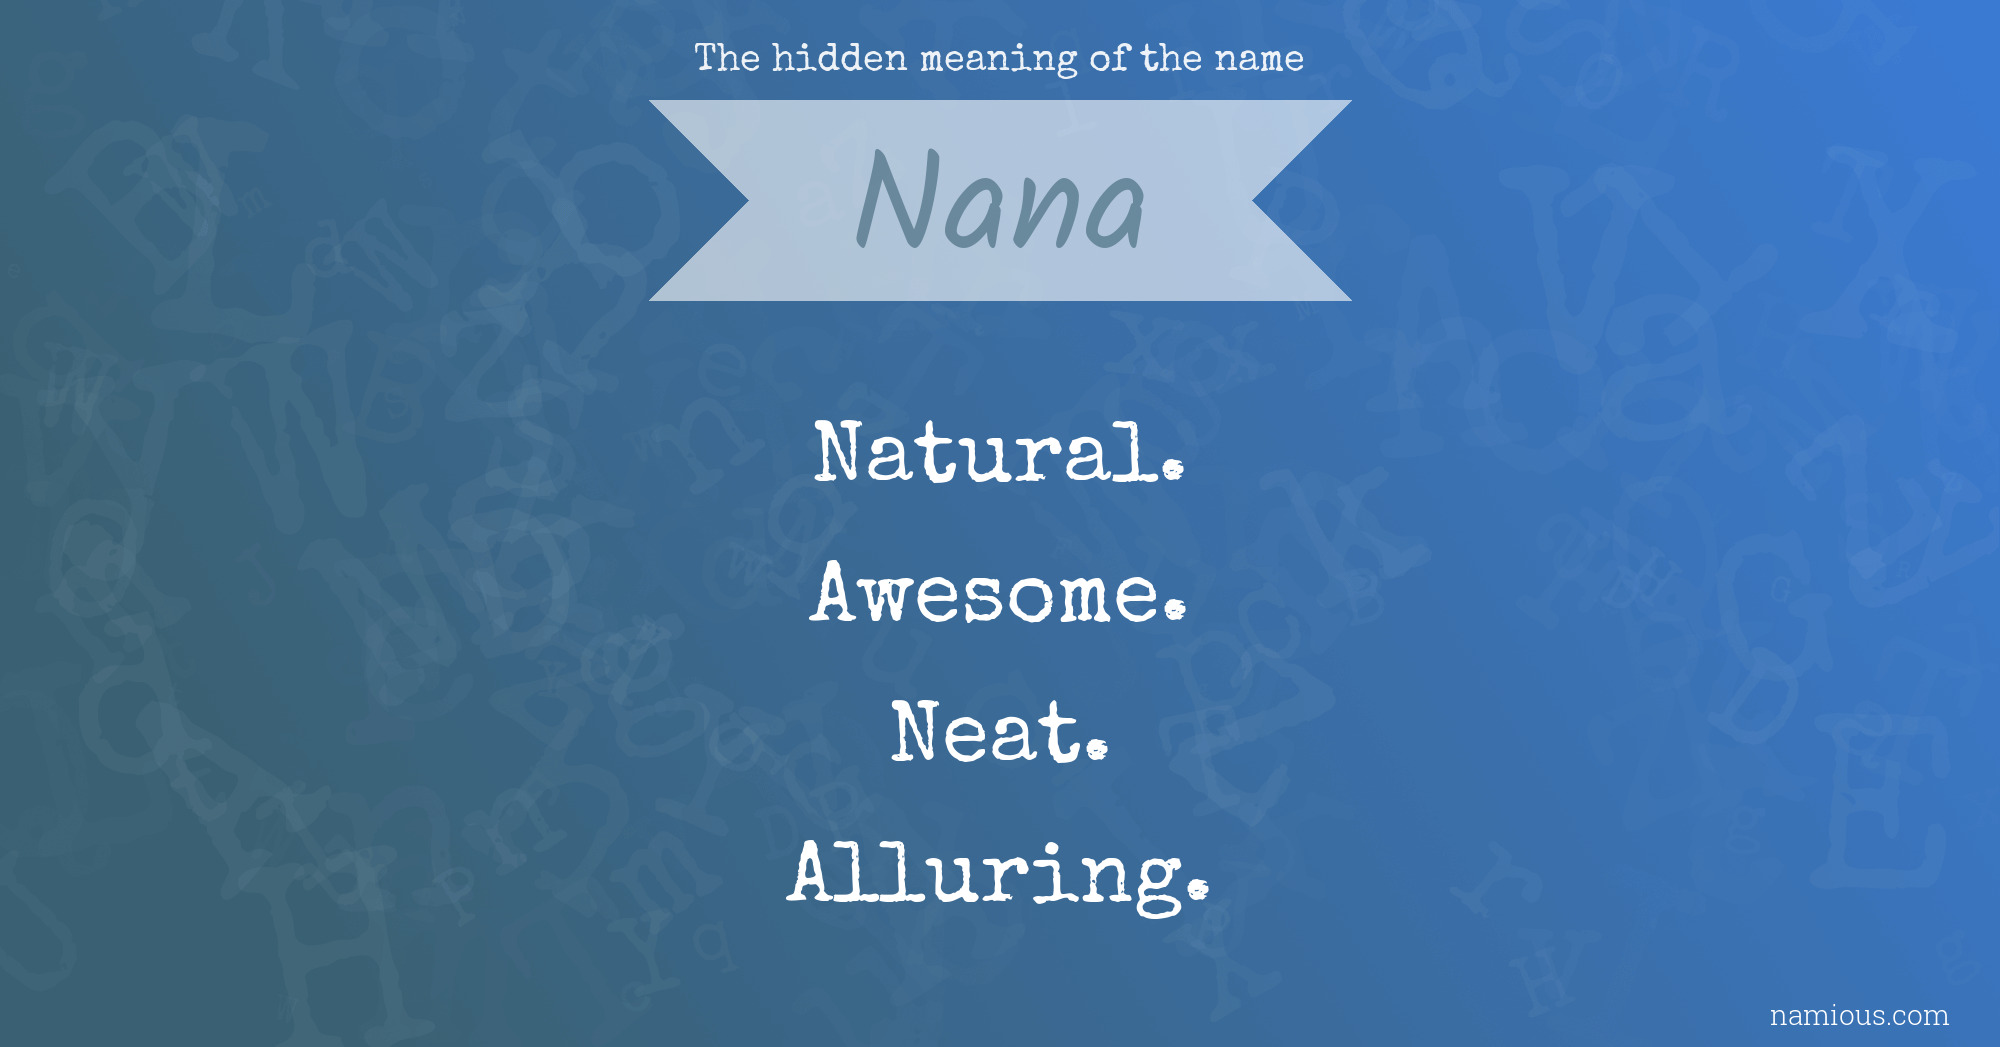 The hidden meaning of the name Nana